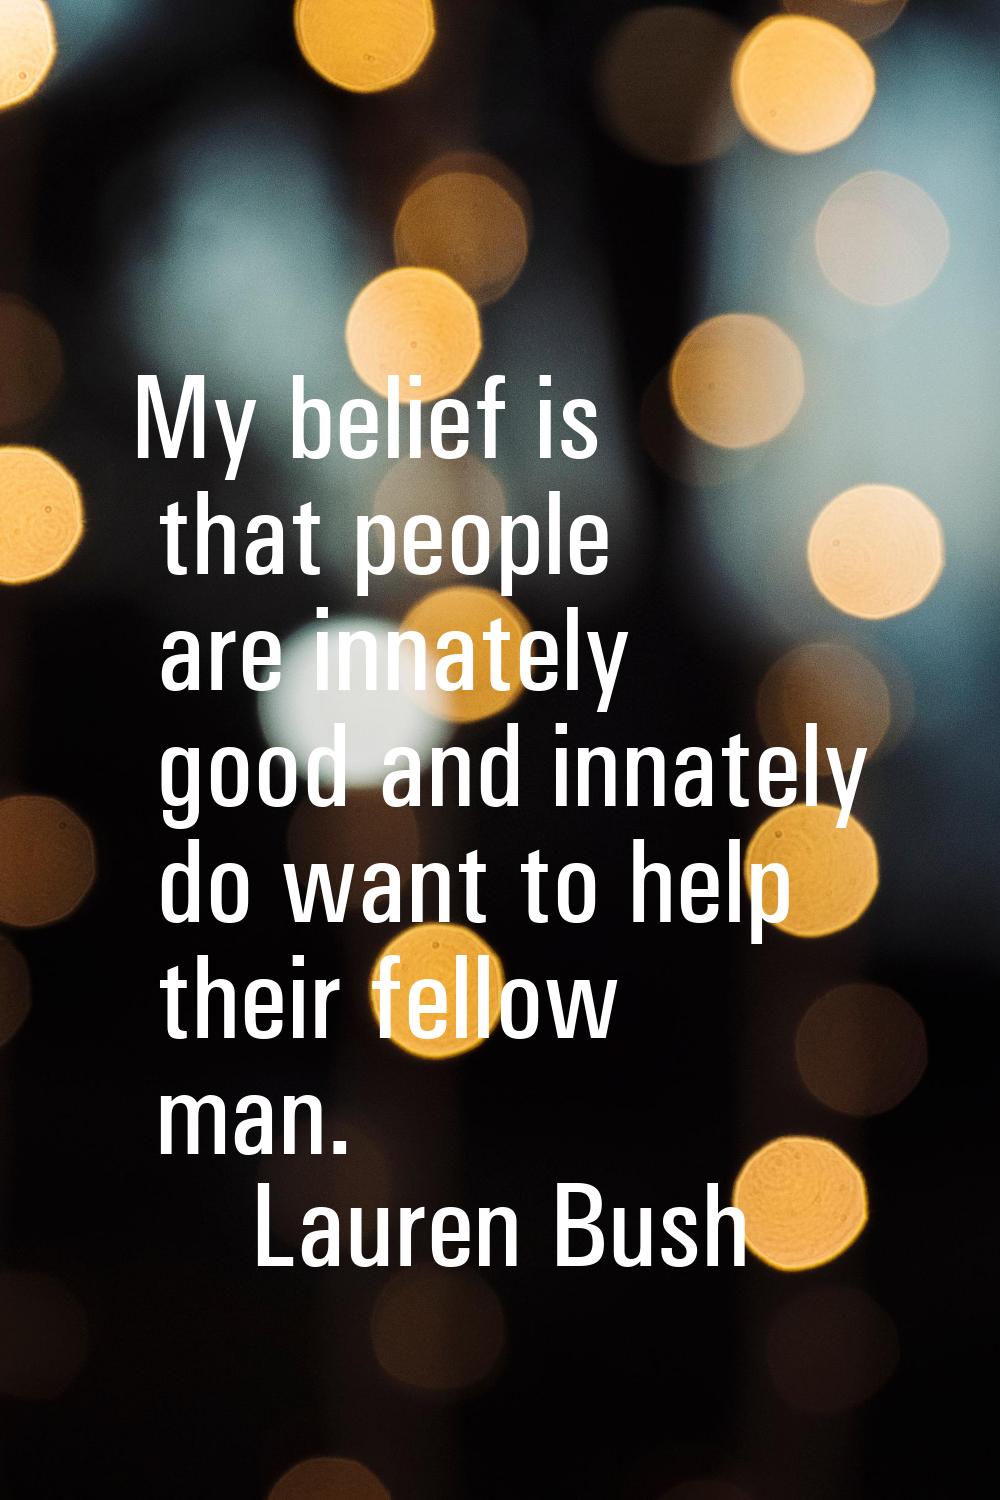 My belief is that people are innately good and innately do want to help their fellow man.